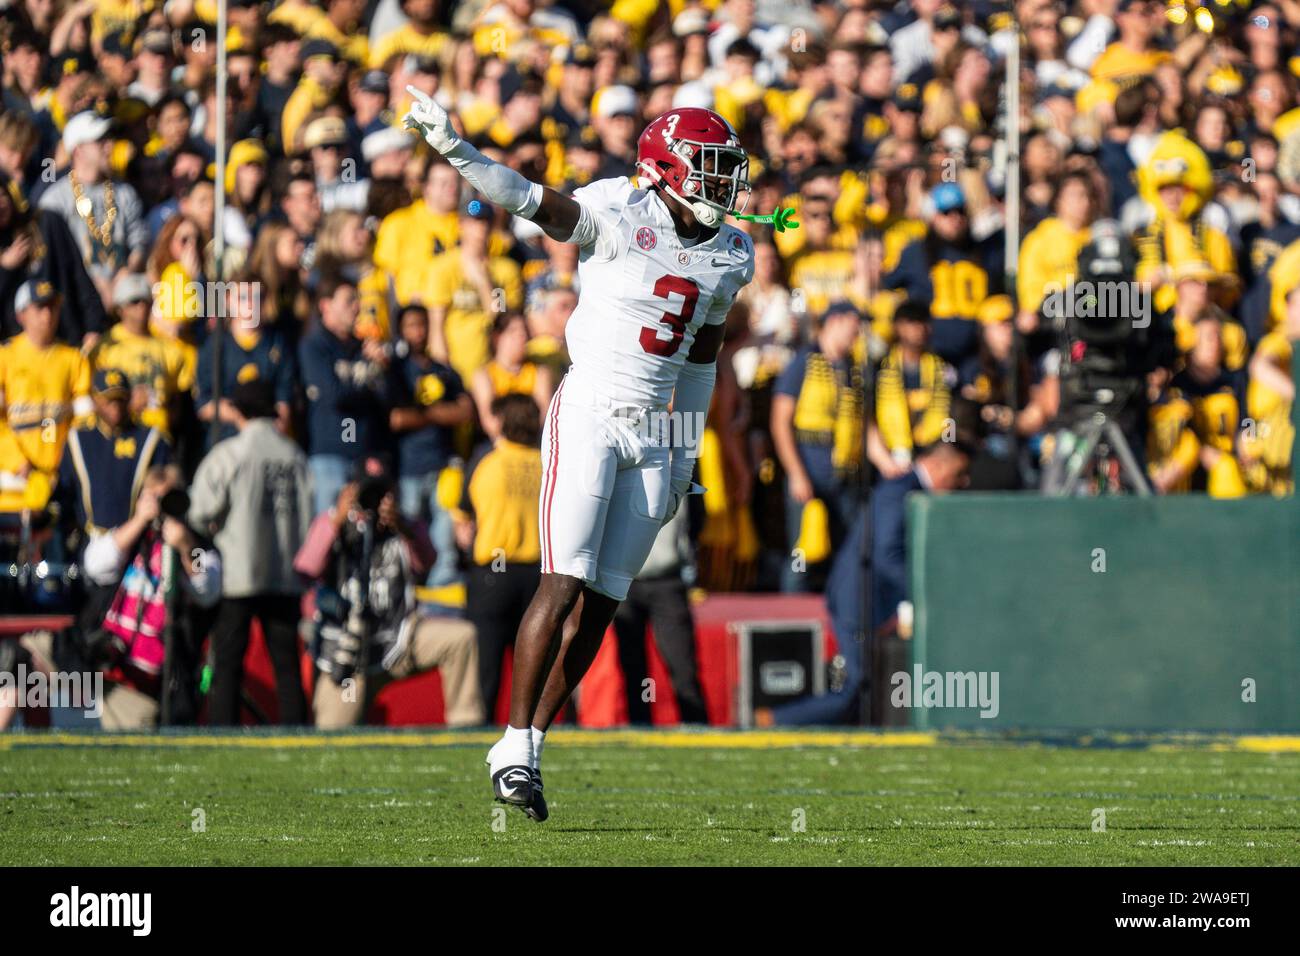 Alabama Crimson Tide defensive back Terrion Arnold (3) celebrates during the CFP Semifinal at the Rose Bowl Game against the Michigan Wolverines, Mond Stock Photo